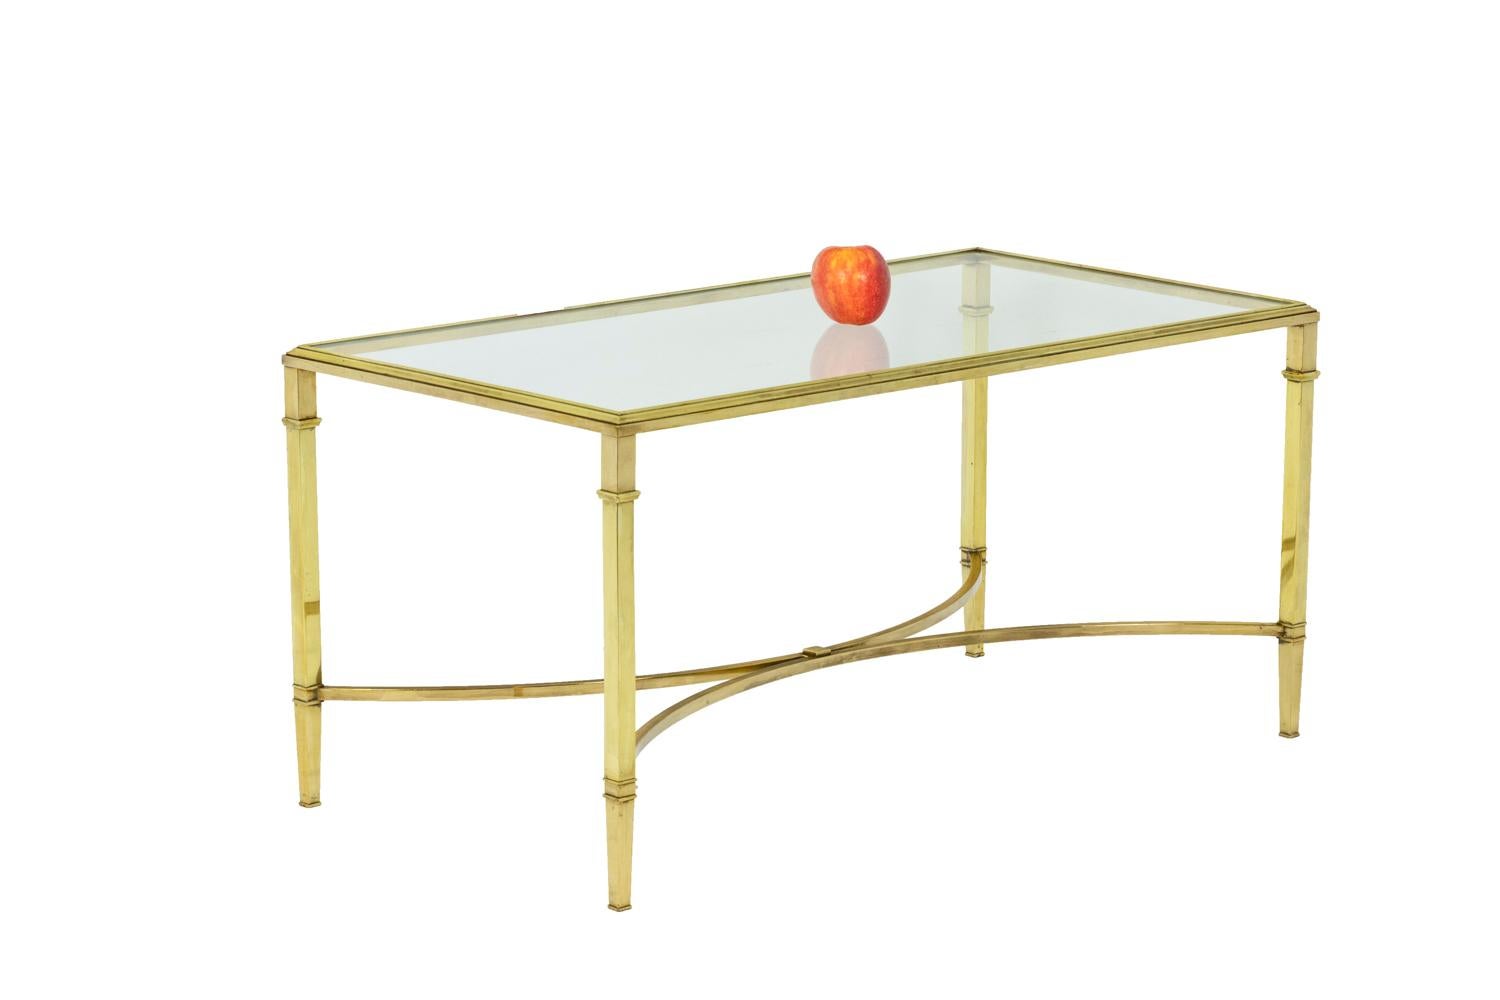 Lounge coffee table in solid and gilt bronze. The rectangular top is composed of a molded frame that fits a transparent glass. The Four square section and slightly tapered feet in the lower part are adorned with rings and connected by an X-shaped